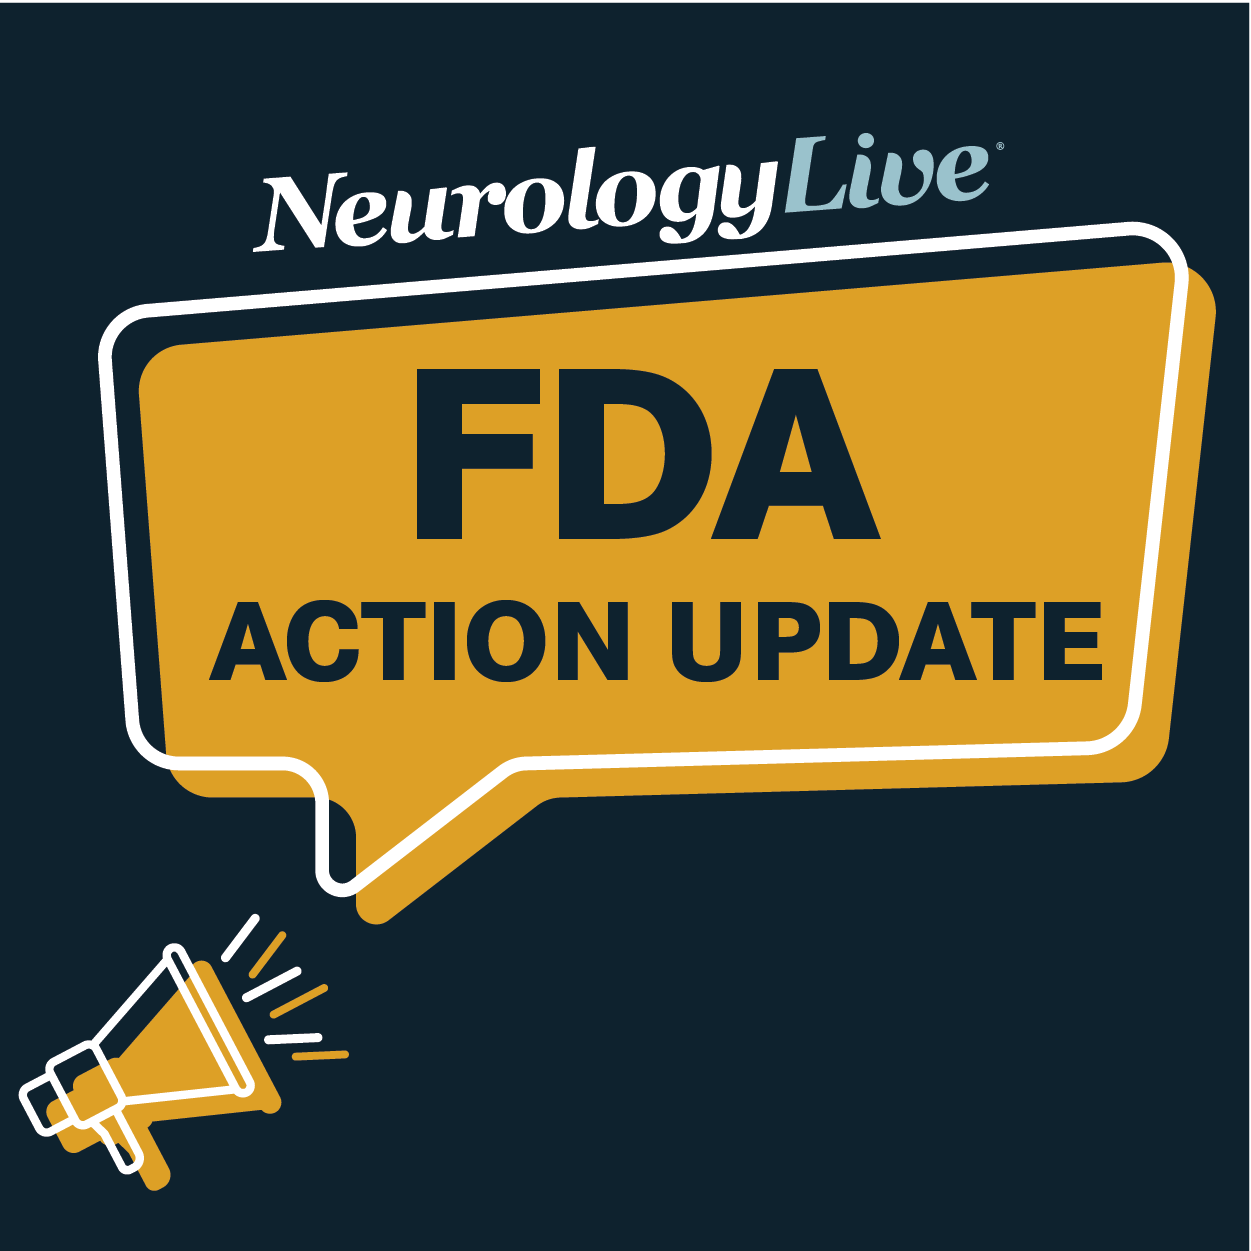 FDA Action Update, February 2022: Approvals, Resubmissions, Application Clearances 